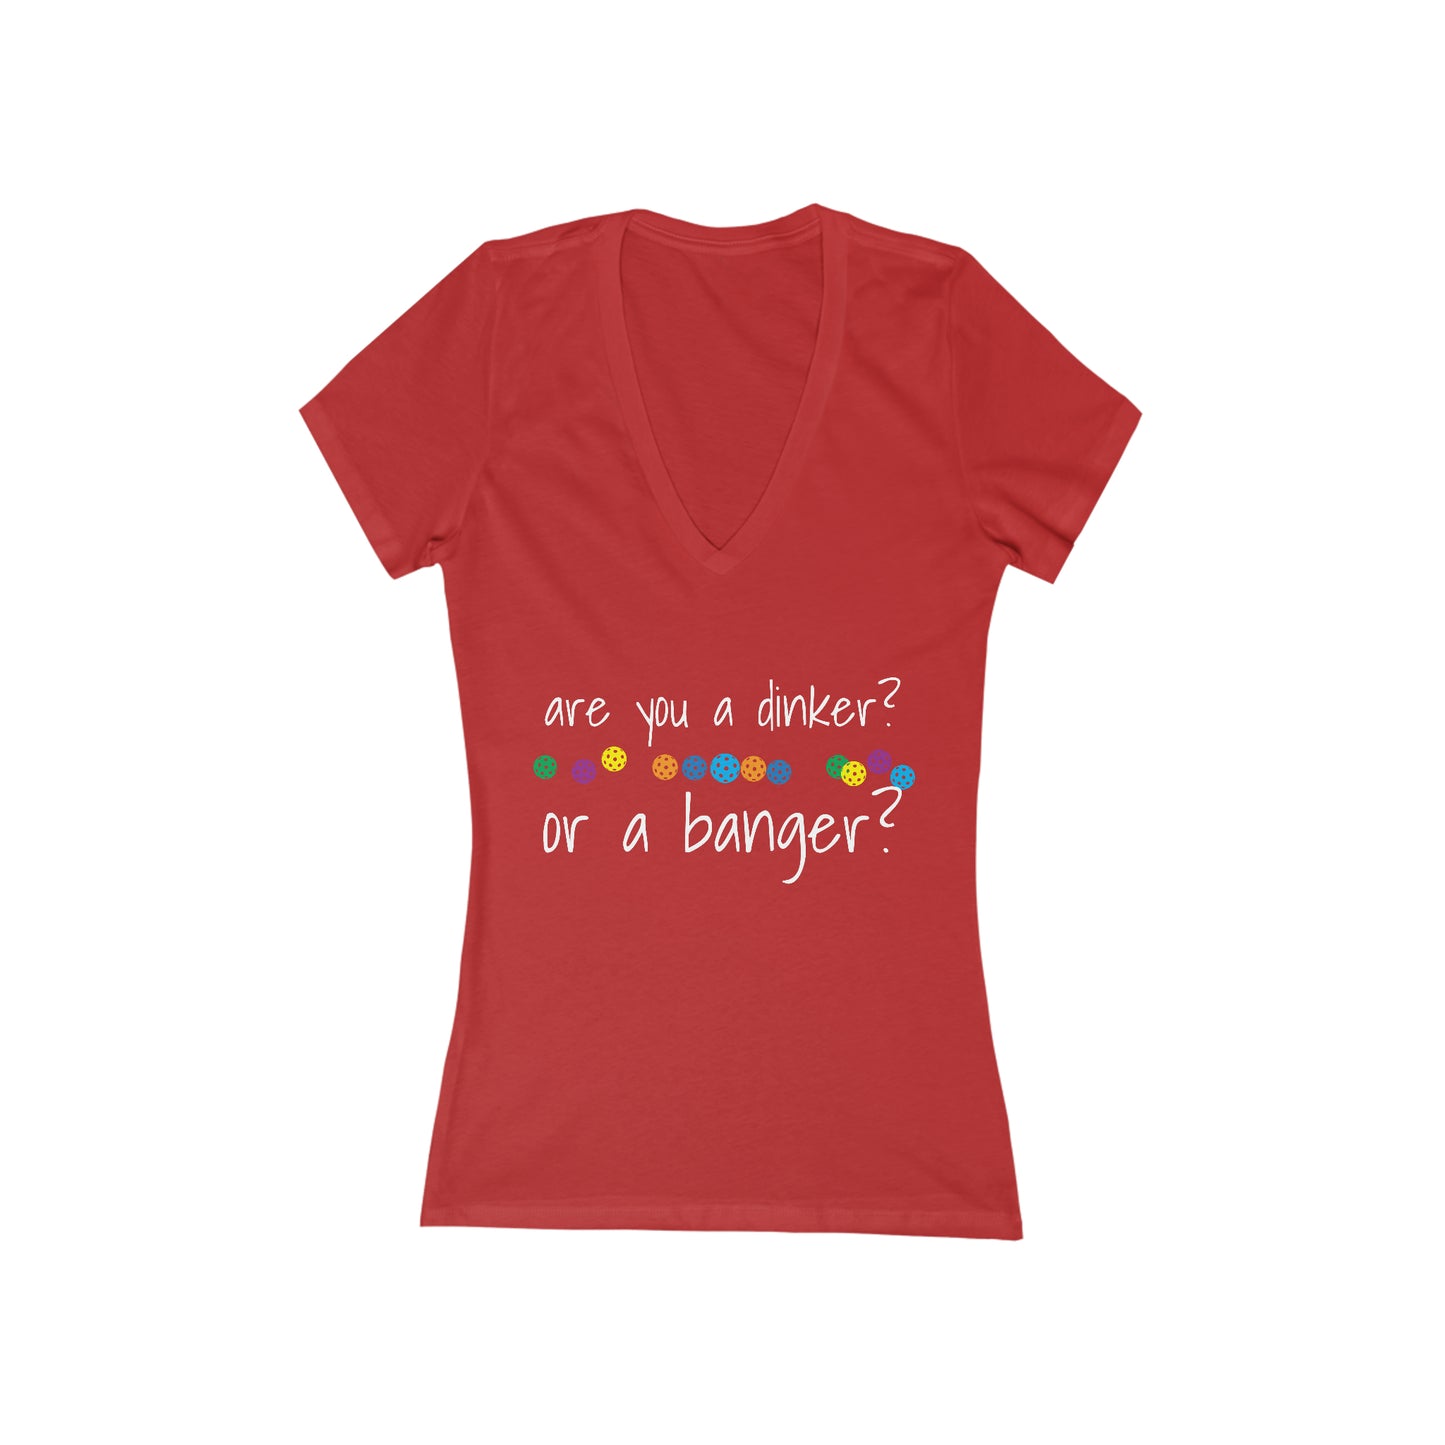 Womens' Jersey Short Sleeve Deep V-Neck Tee - are you a dinker or a banger